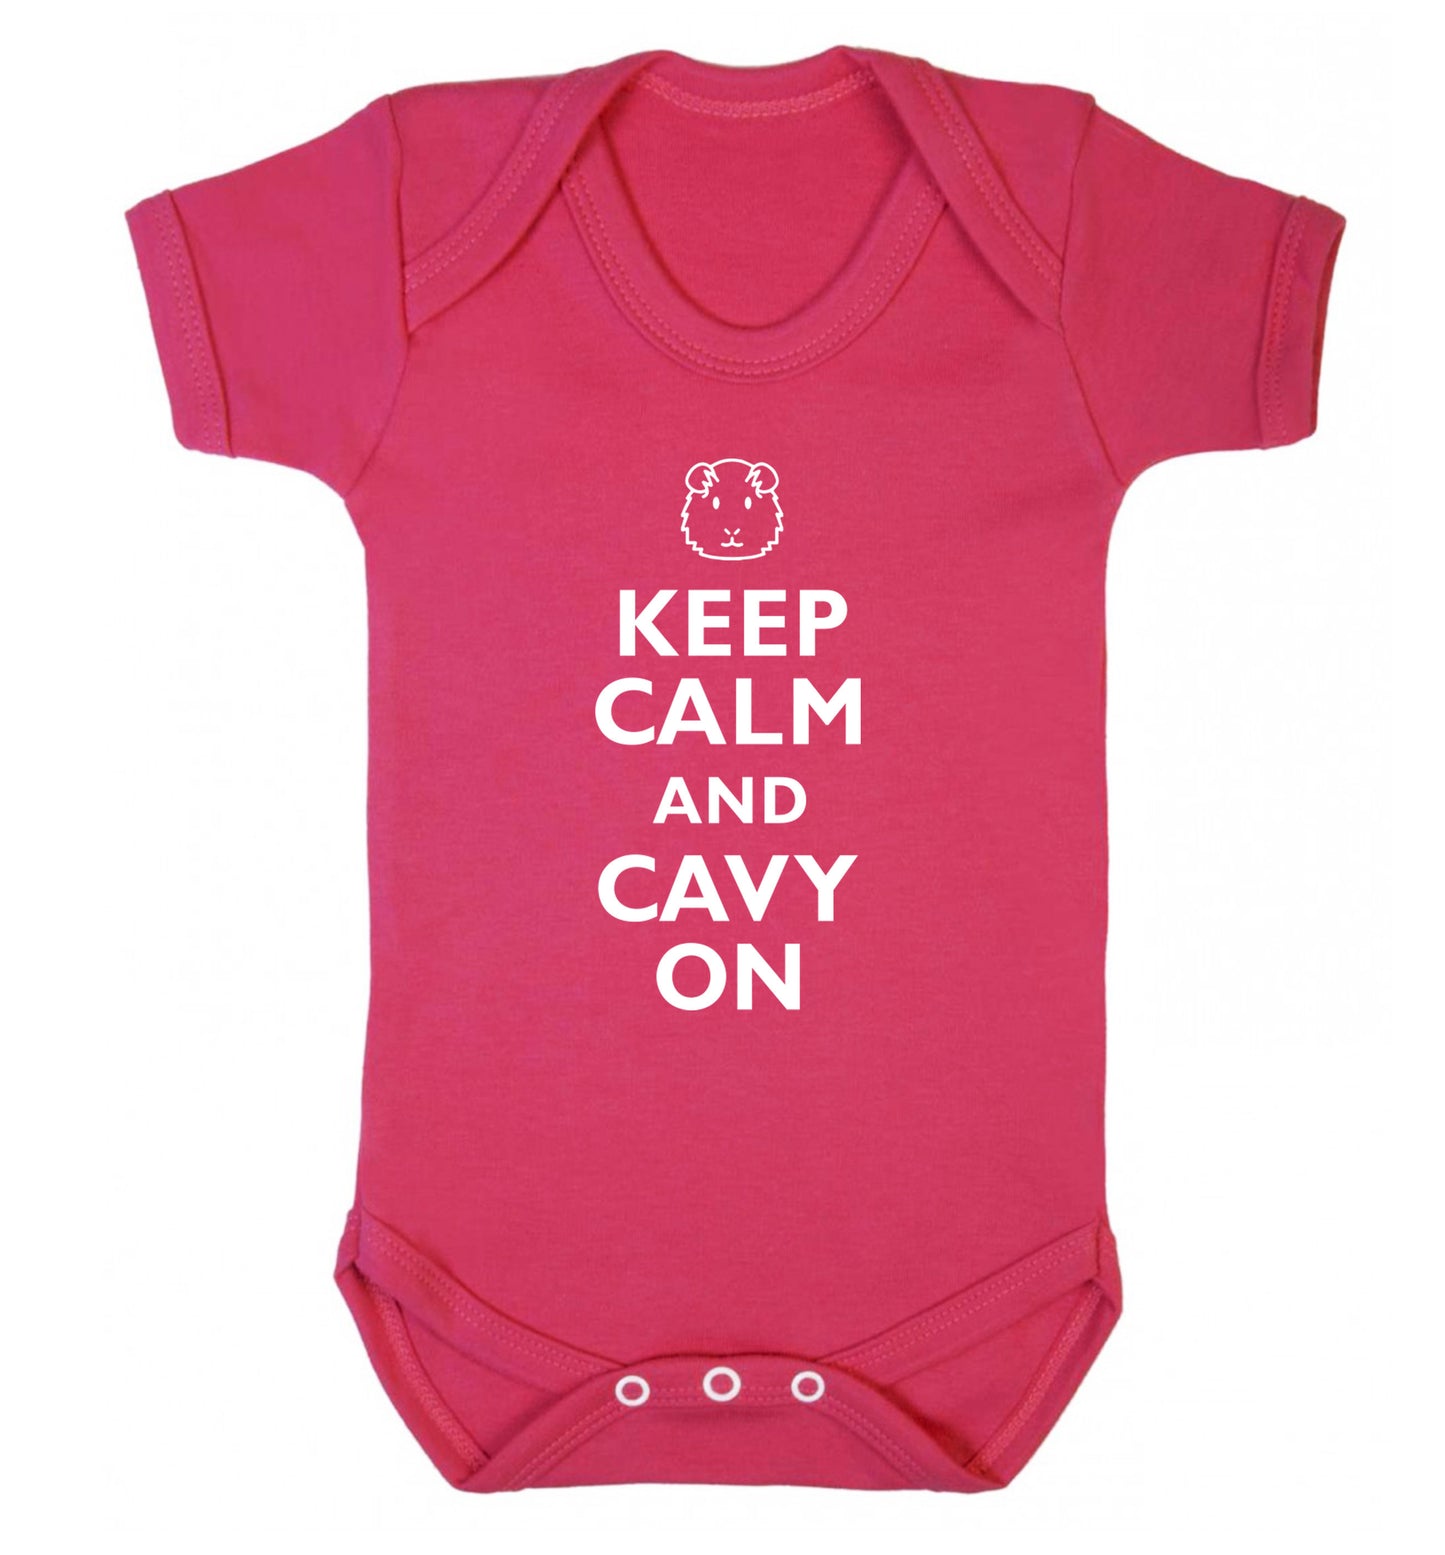 Keep calm and cavvy on Baby Vest dark pink 18-24 months